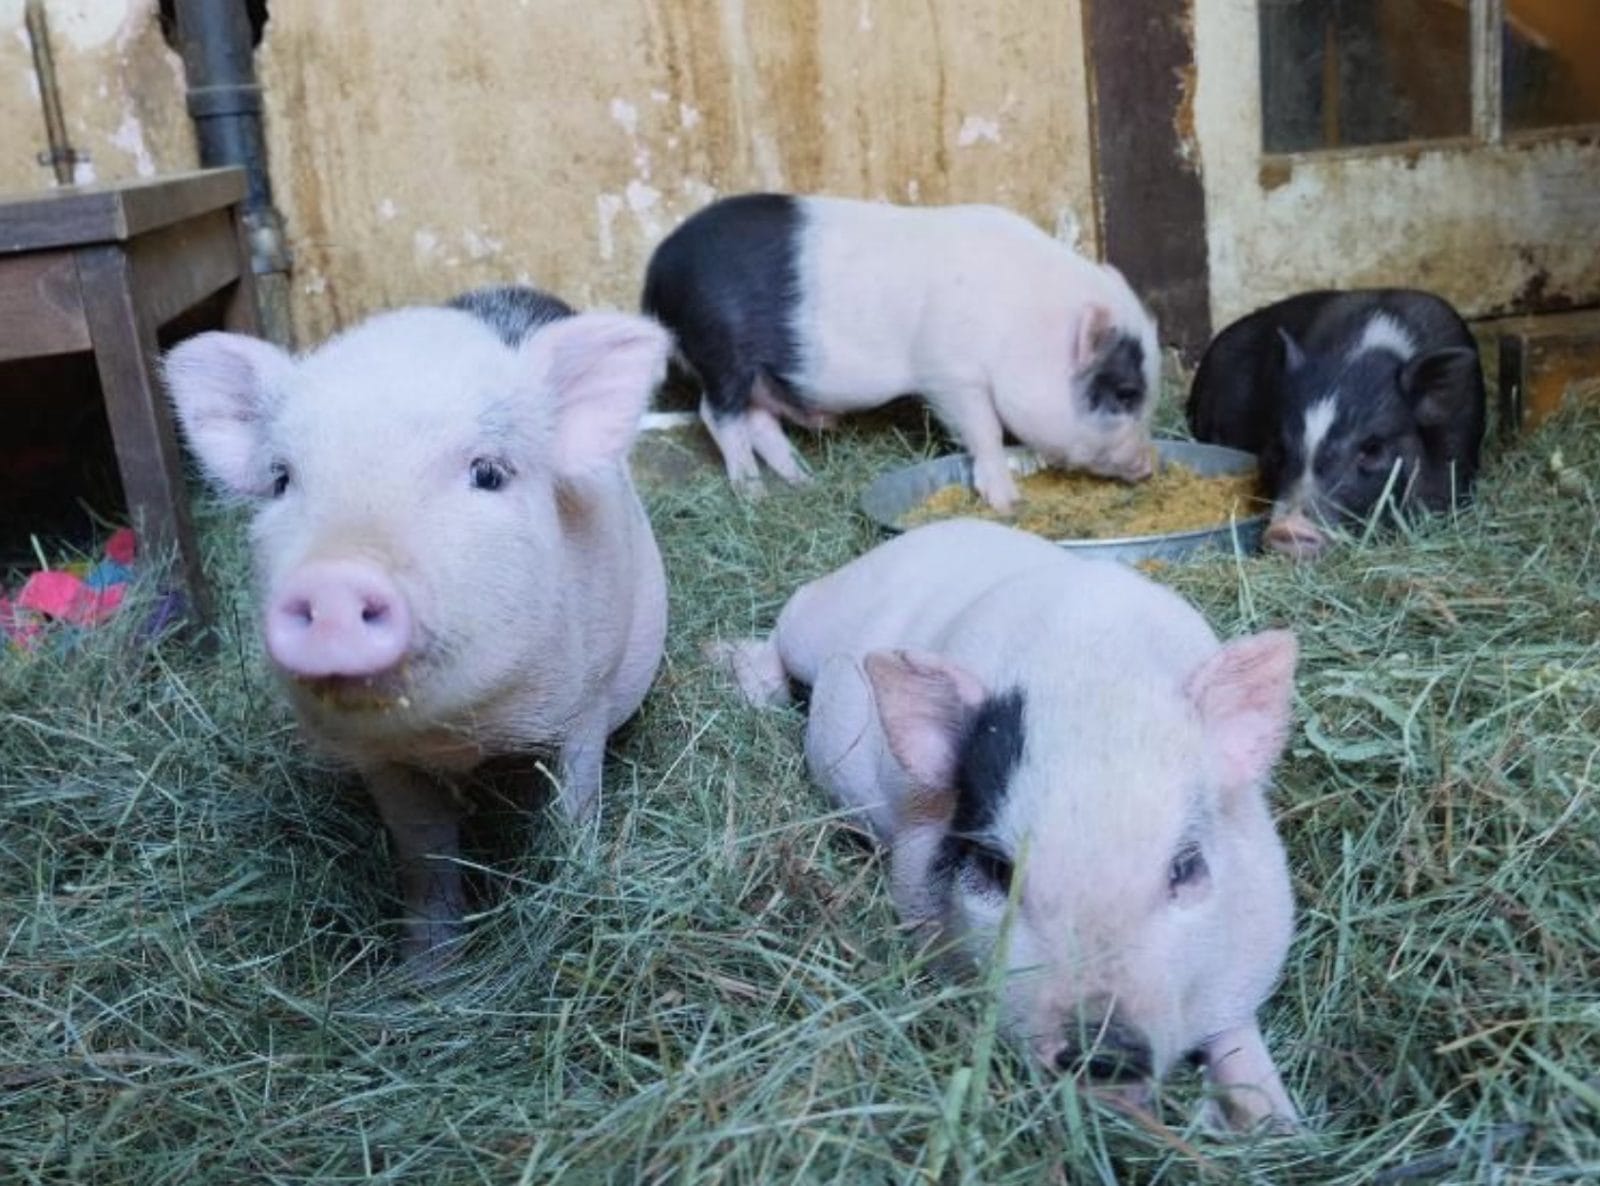 Three baby piglets laying and standing in hay